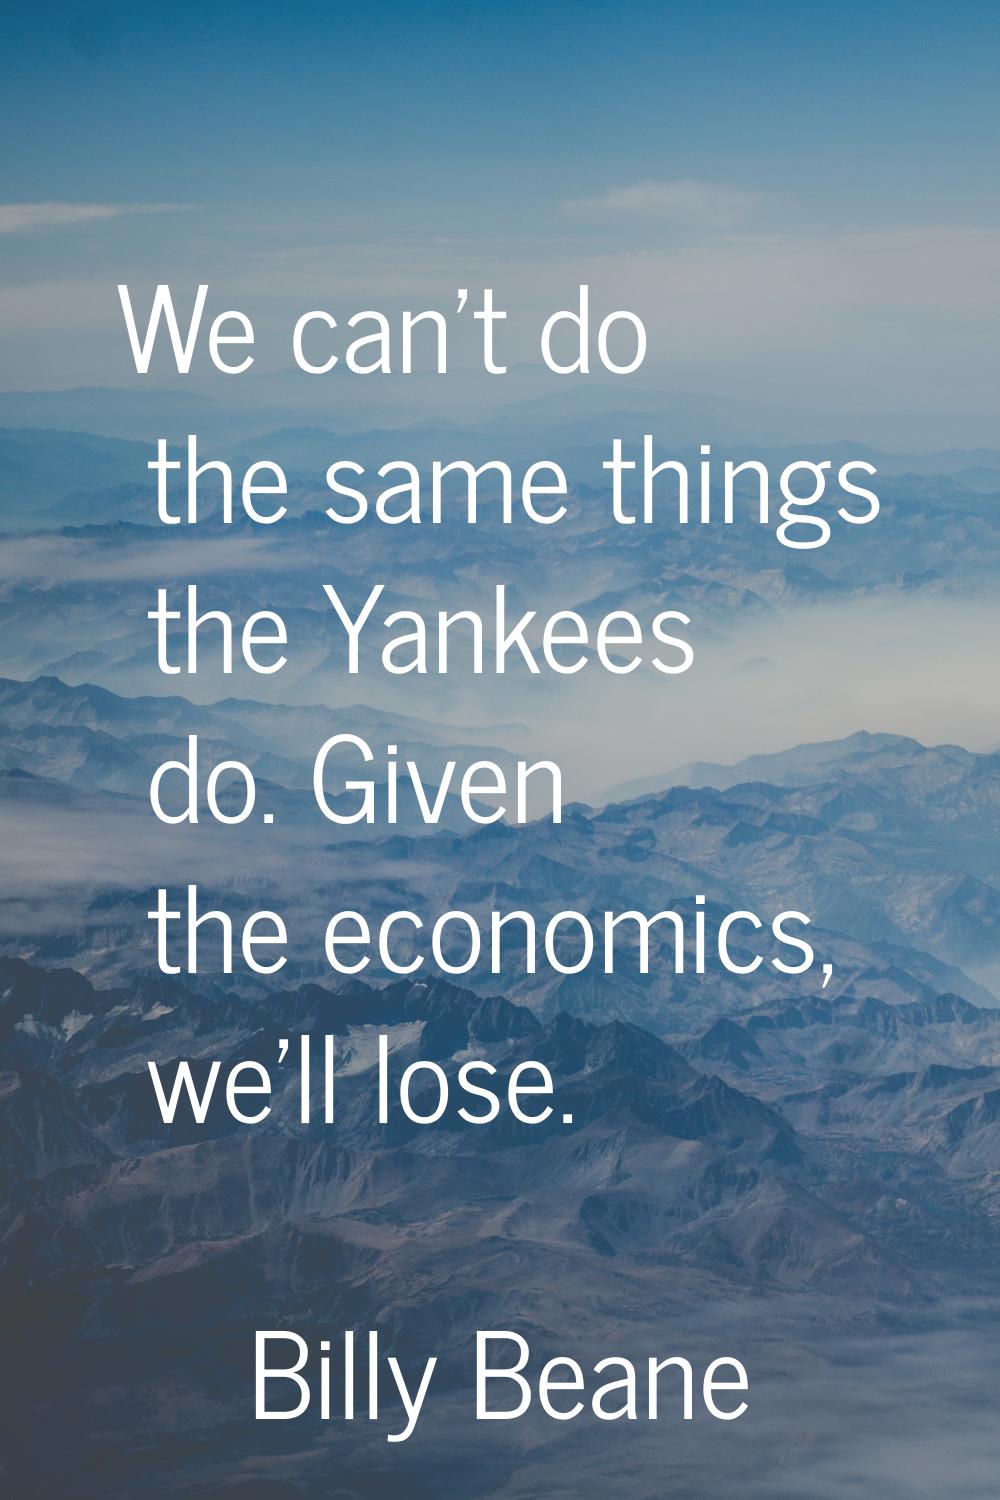 We can't do the same things the Yankees do. Given the economics, we'll lose.